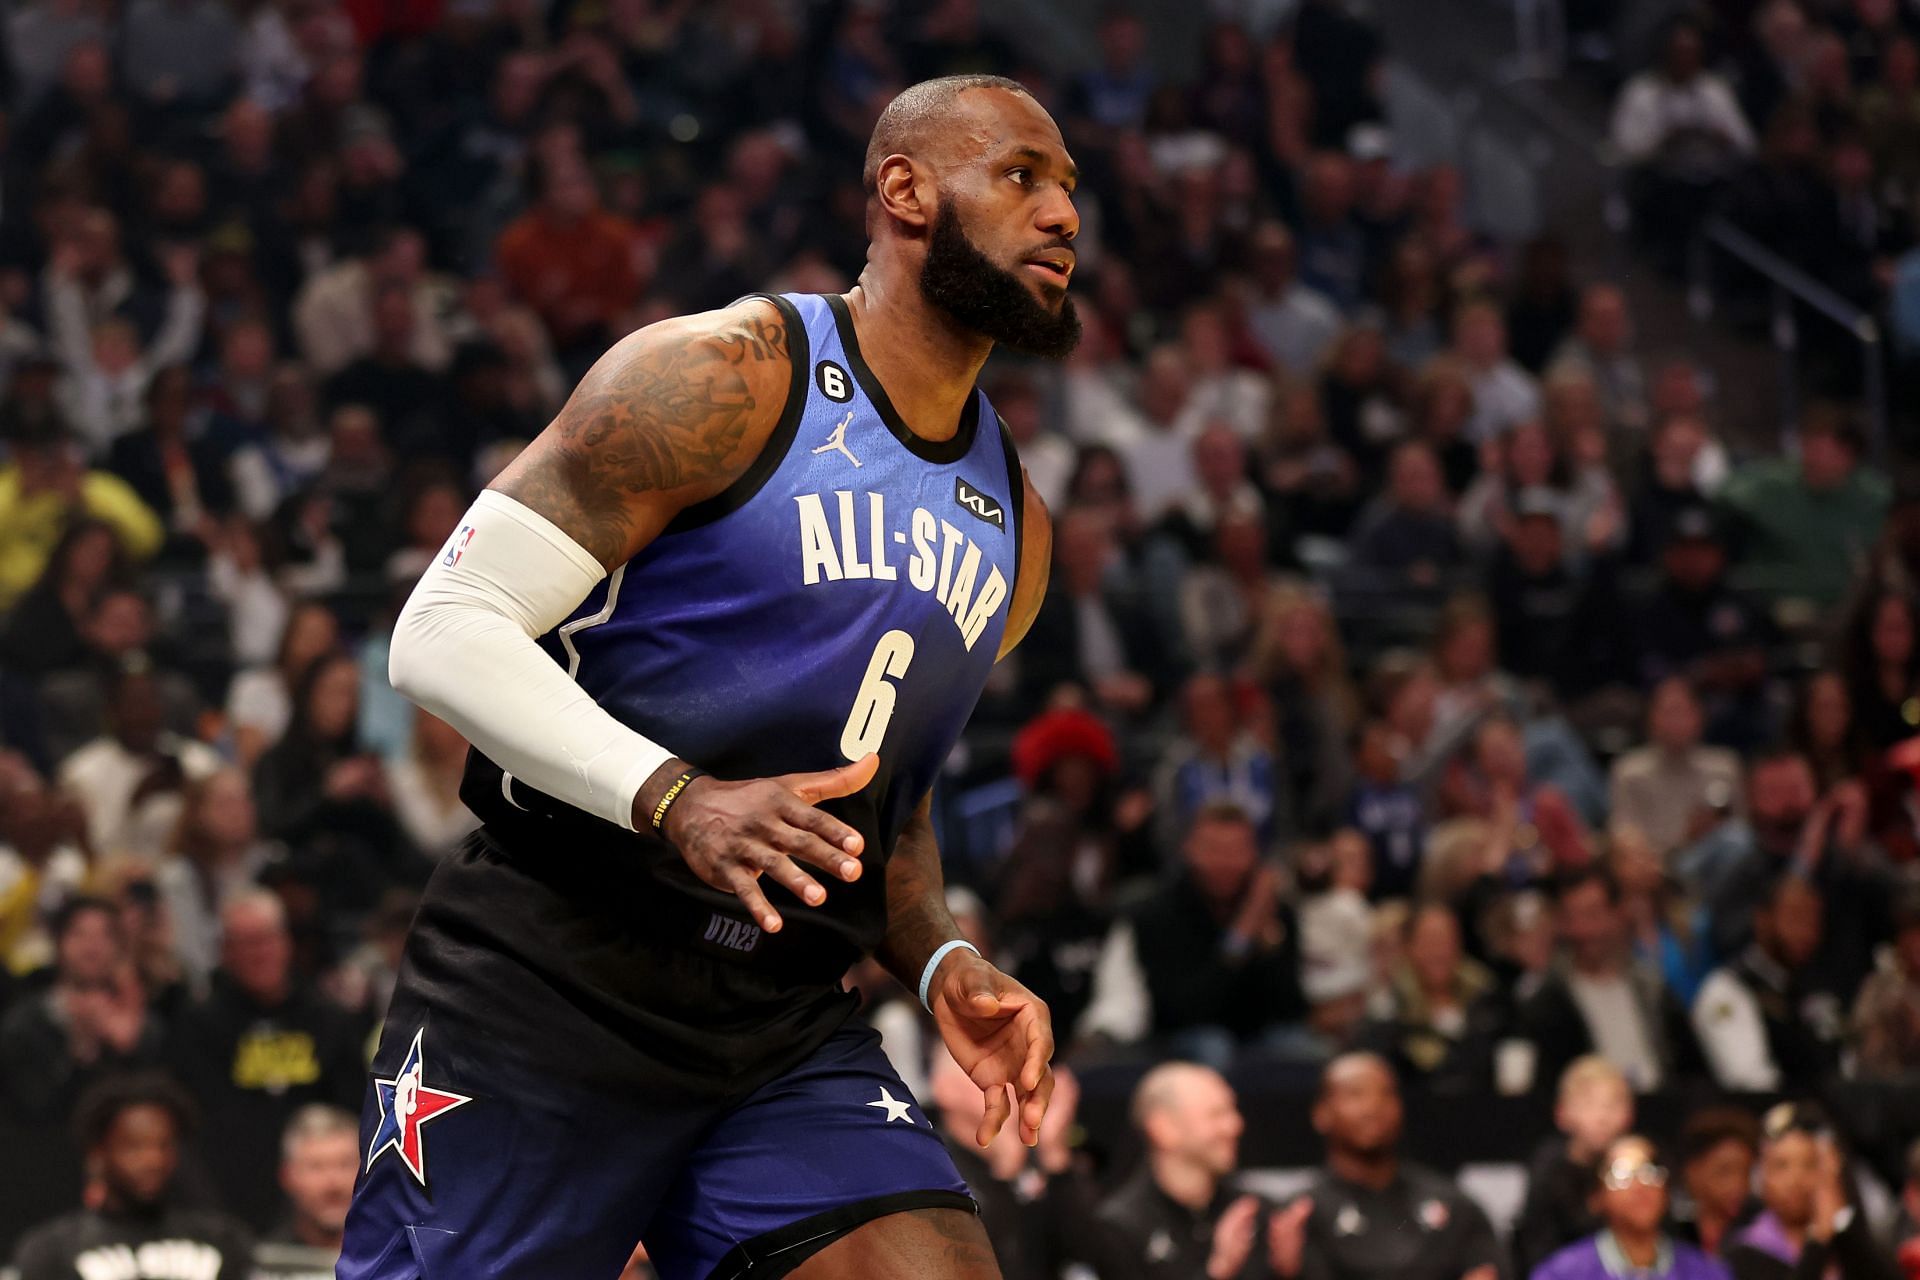 LeBron James left the All-Star game early after injuring his hand.